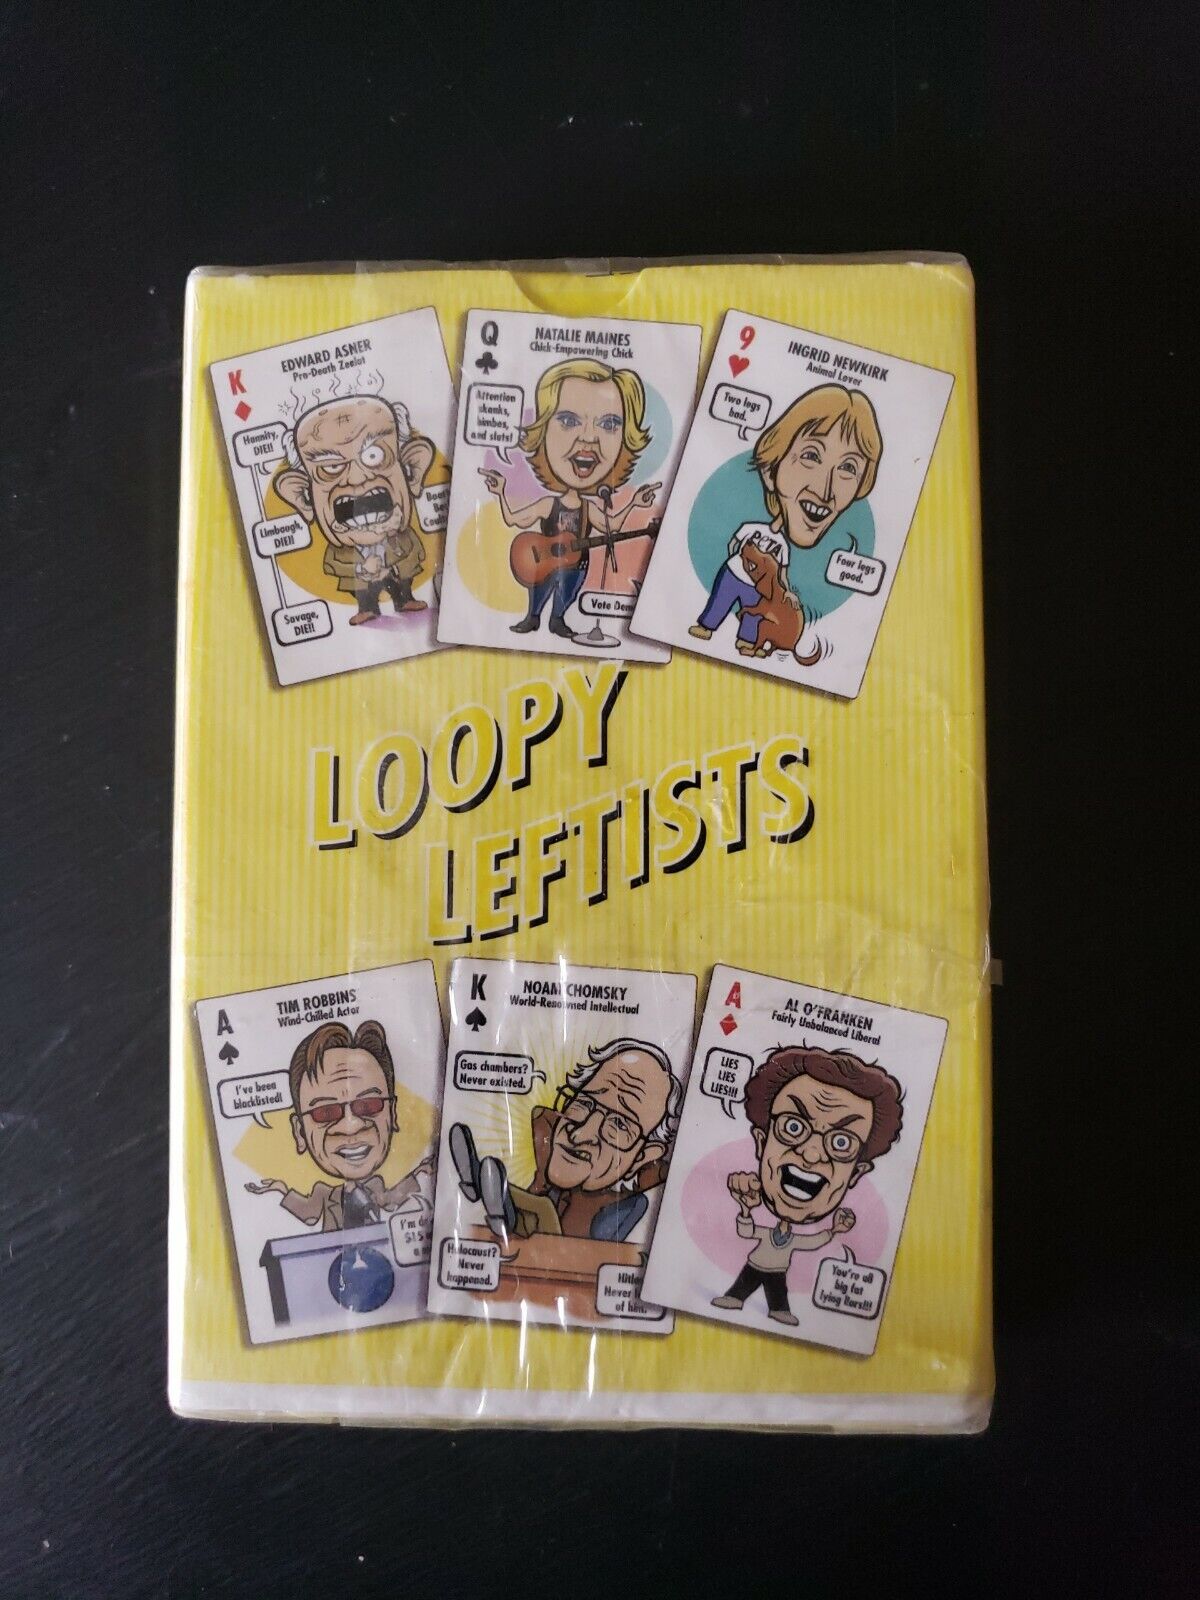 2004 Bush League All Stars Loopy Leftists Playing Cards Democrat Election 2020